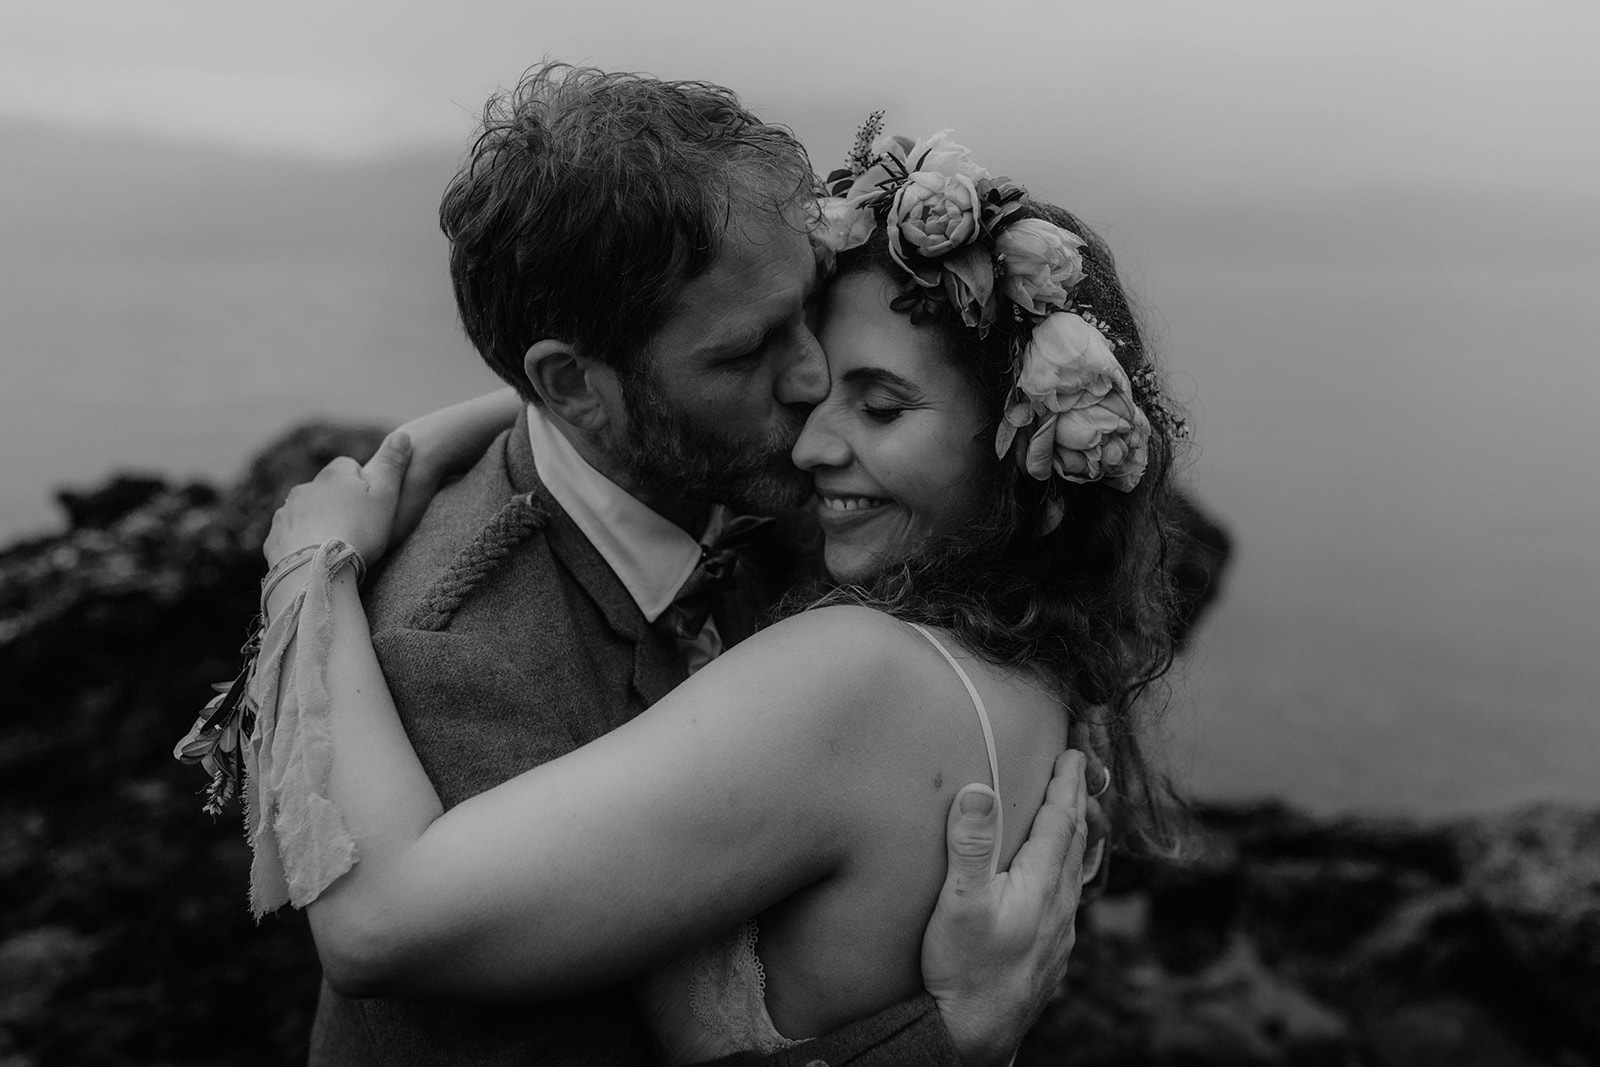 Rebecca and Simon capture the essence of their Isle of Skye elopement with the stunning beach as their backdrop.